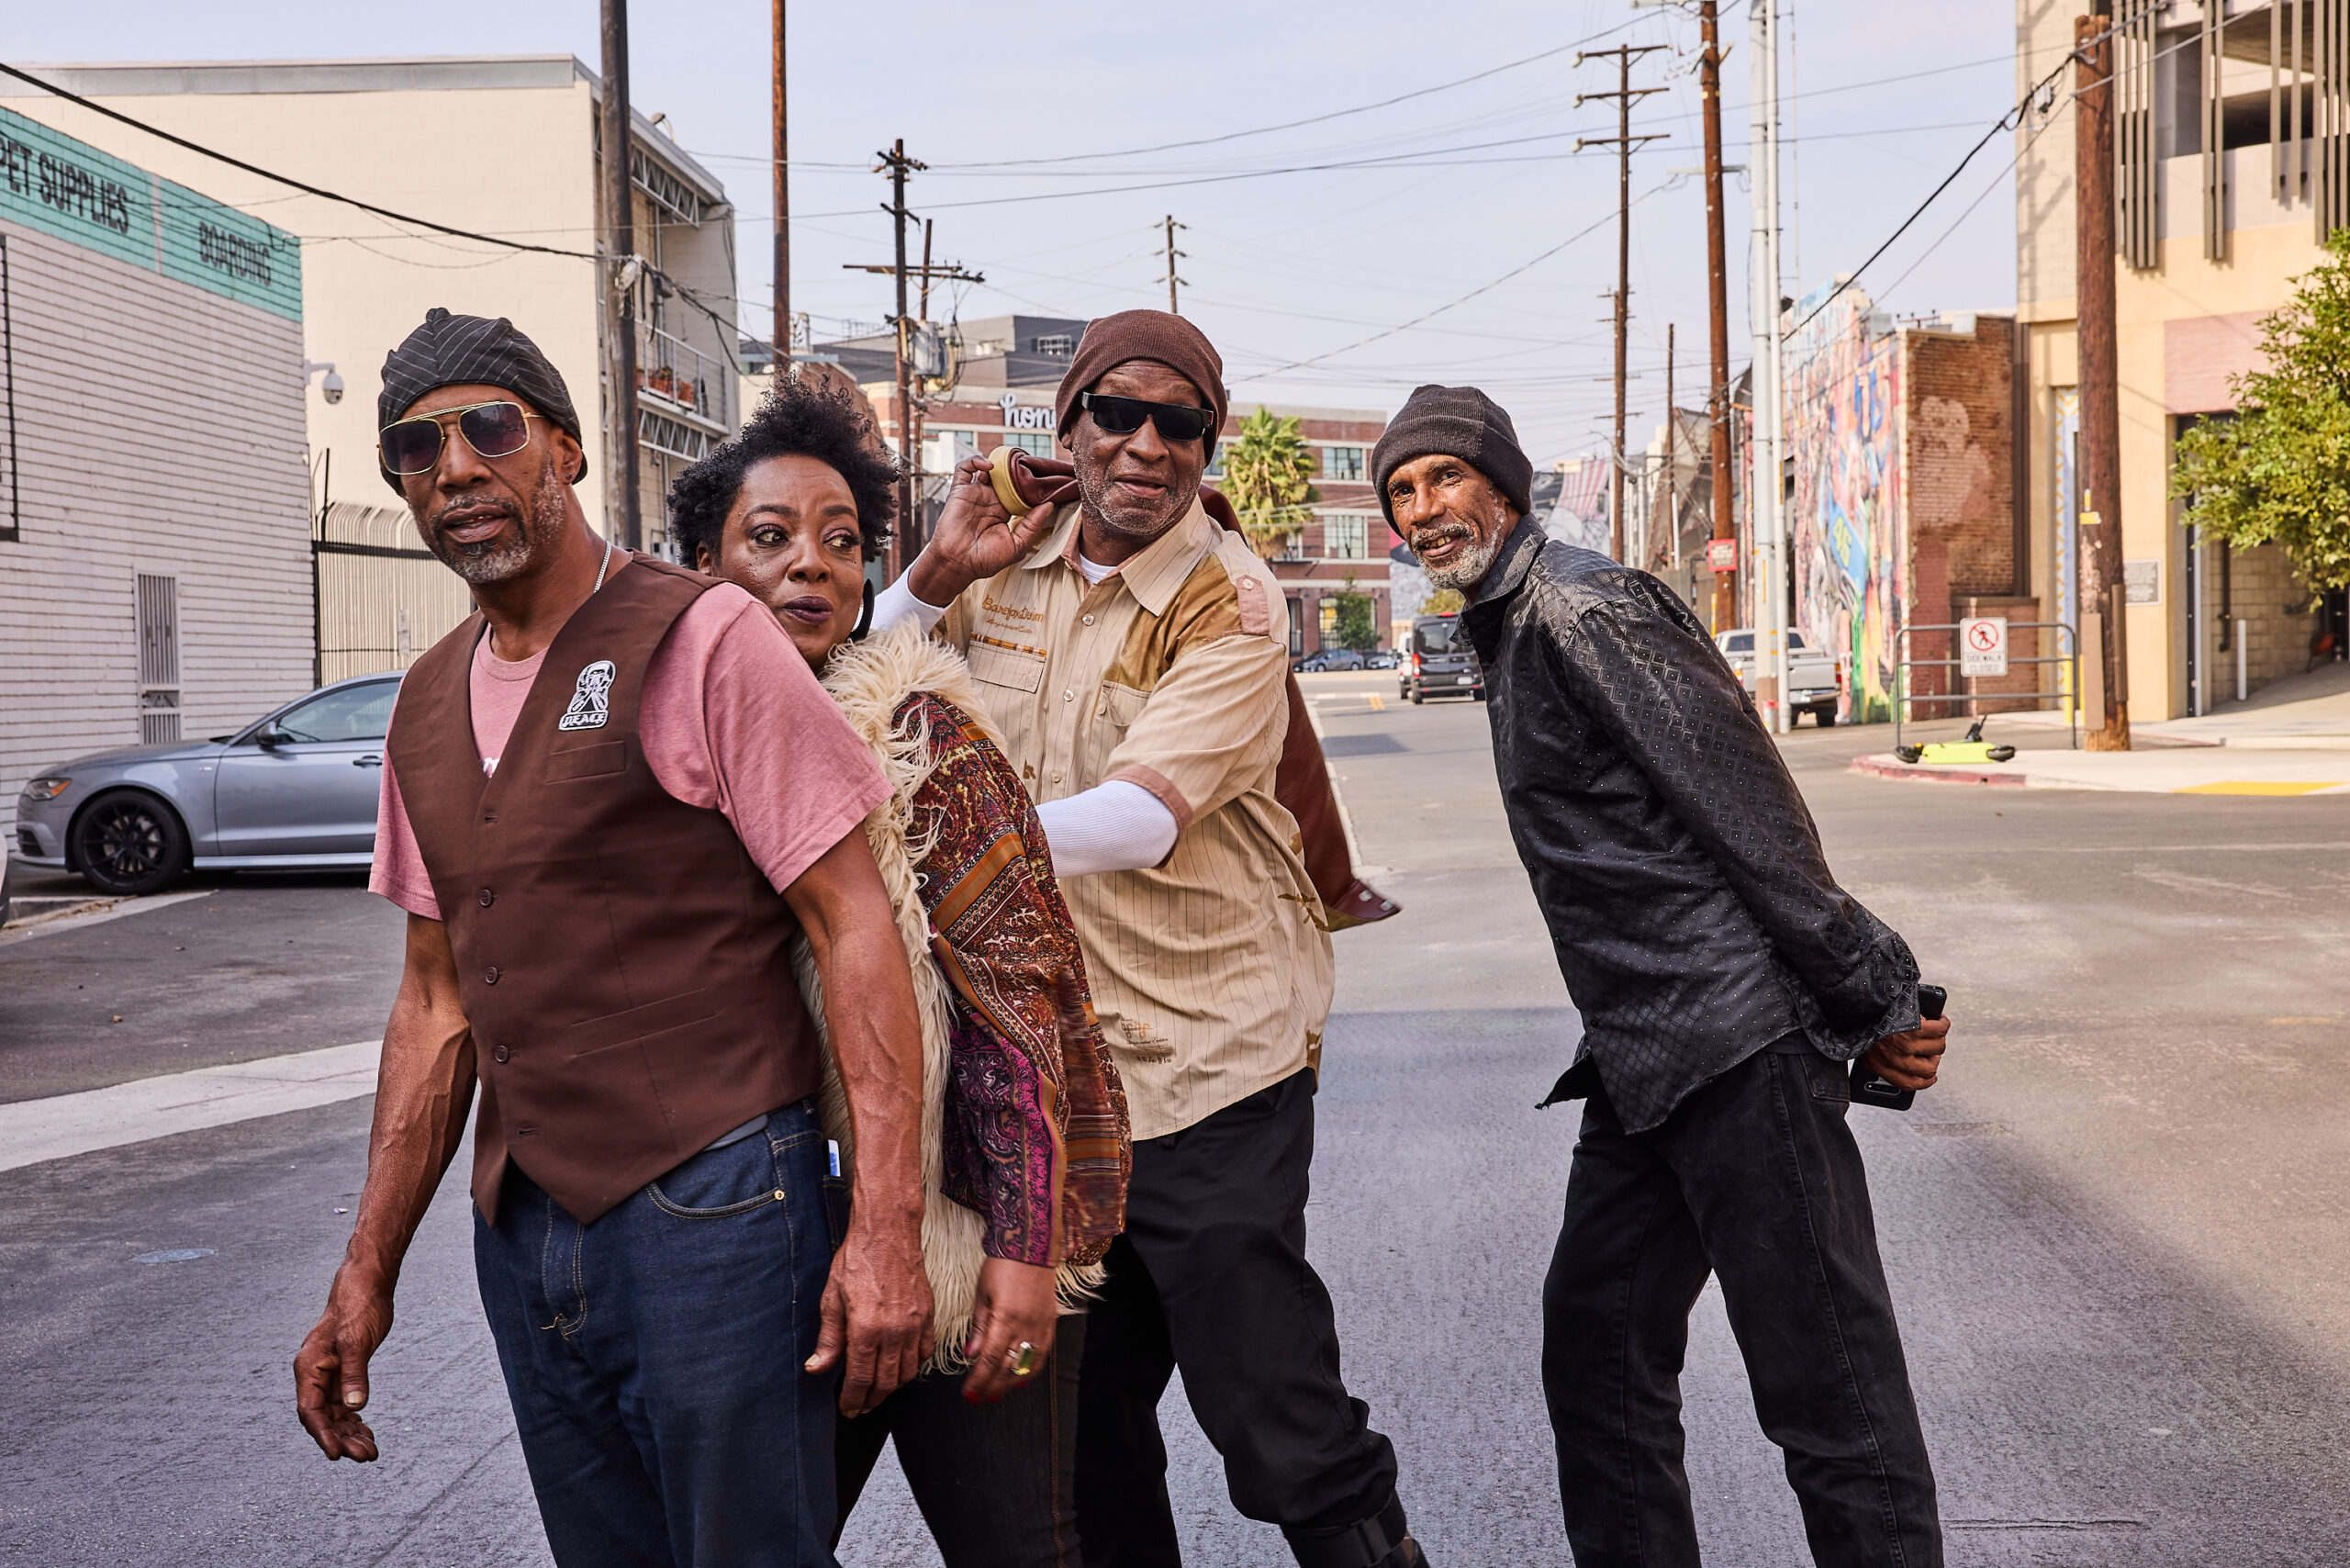 A musician group posing for photos in the arts district of Los Angeles